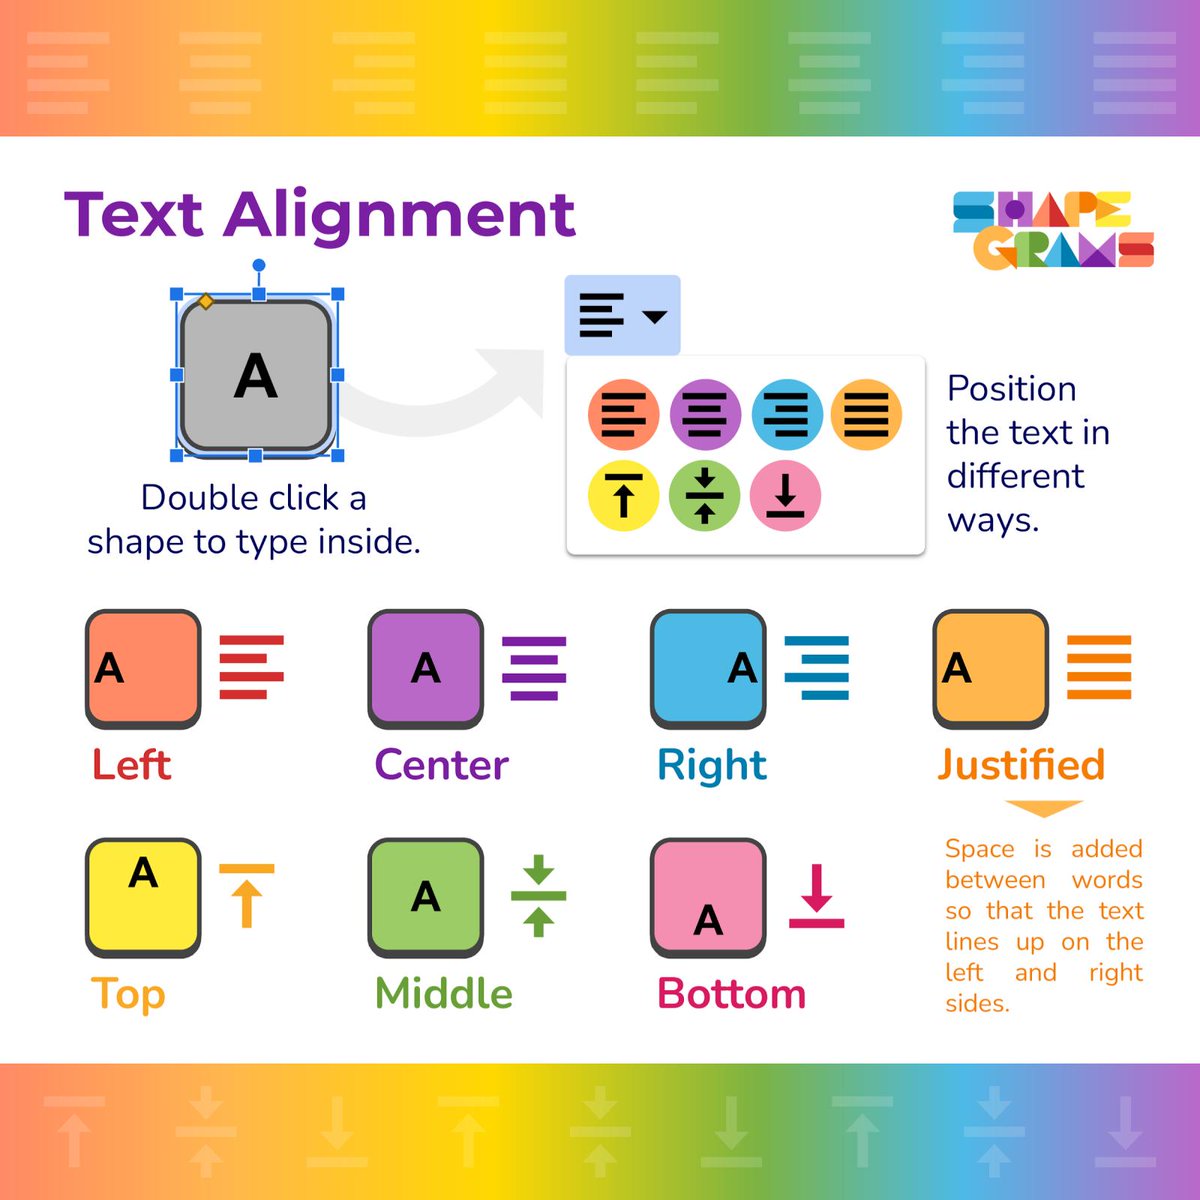 Q: What is 'Justified' text alignment?

A: Space is added between words so that the text lines up on the left and right sides.

P.S. You can position text in different ways inside a shape.

#GoogleSlides #GoogleDrawings #EdTech #GoogleEdu #TeacherTwitter